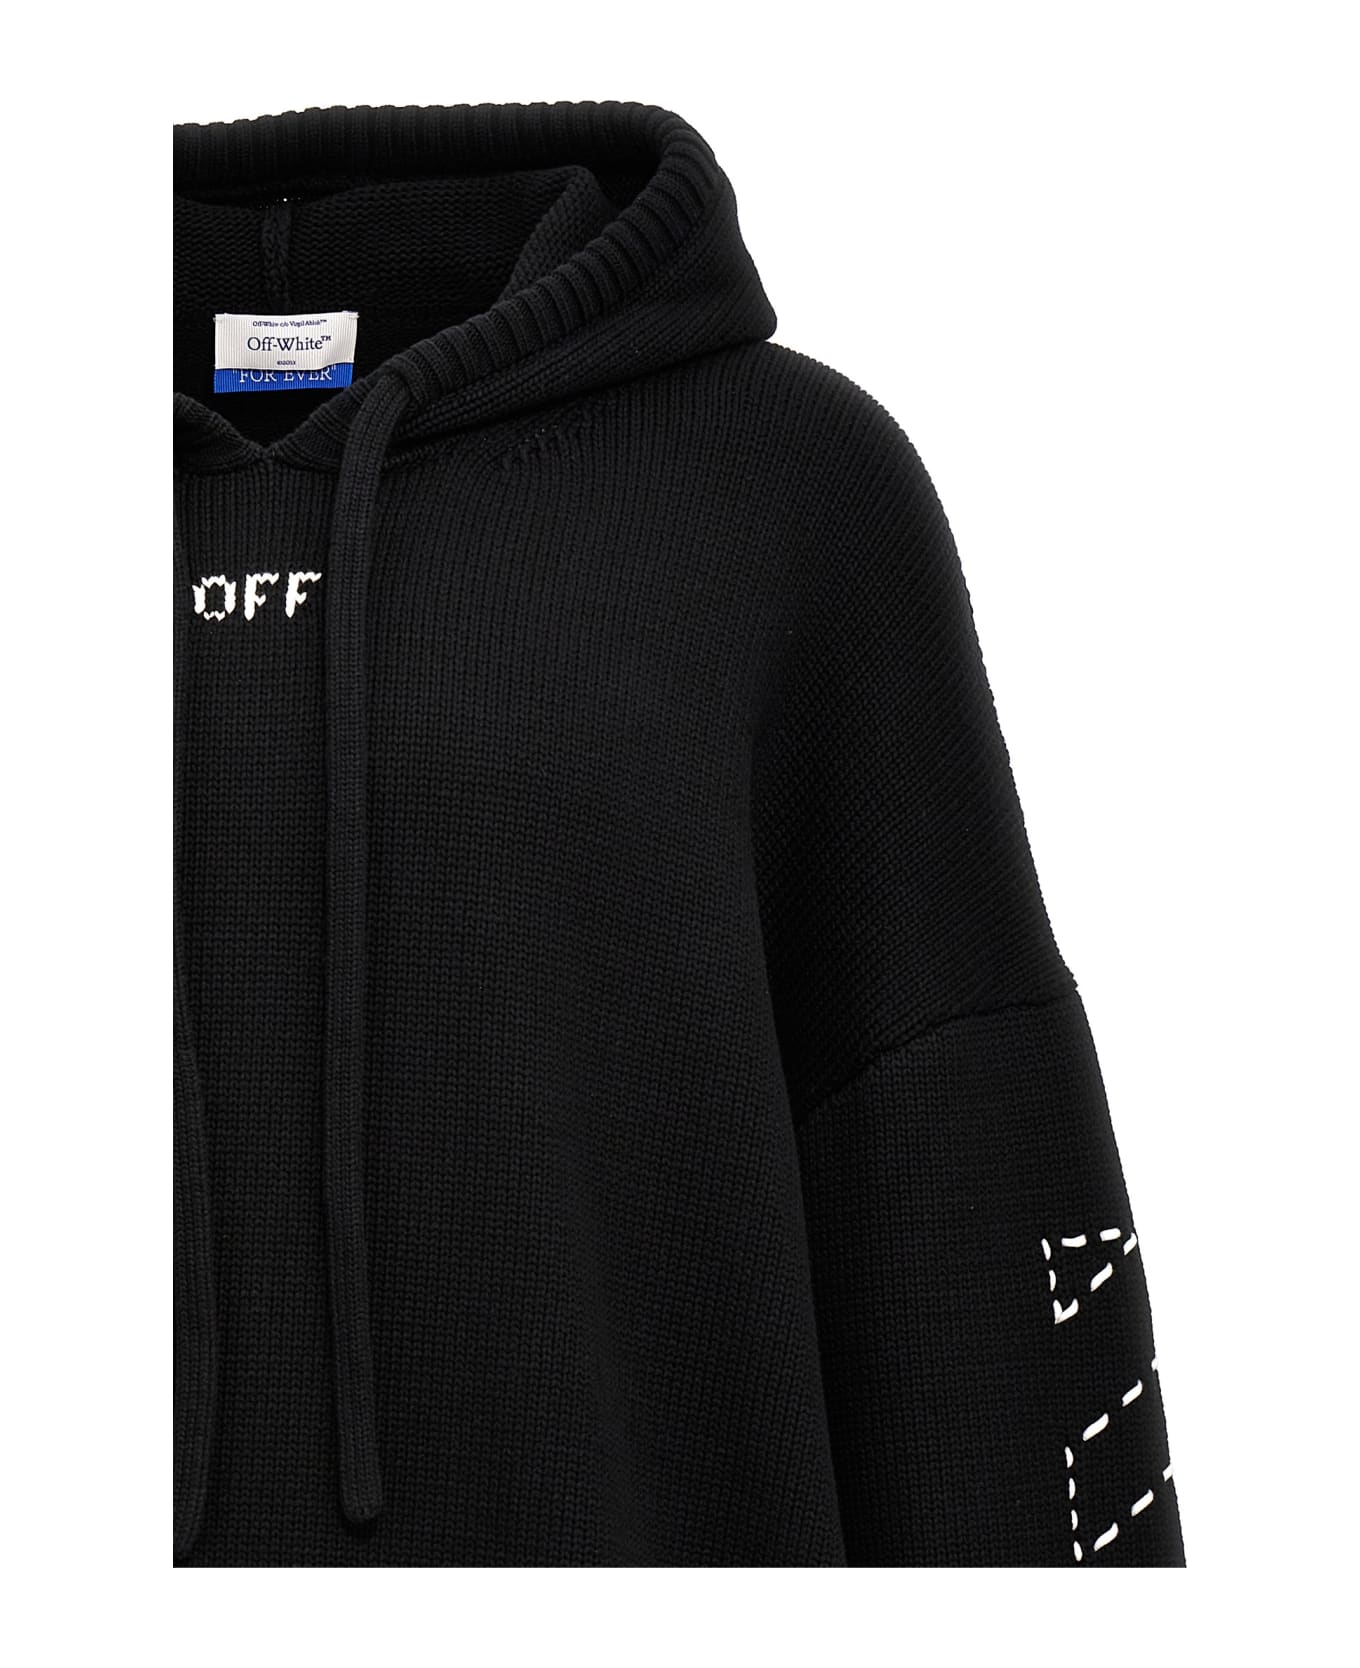 Off-White Stitch Arr Diags Hooded Sweater - White/Black